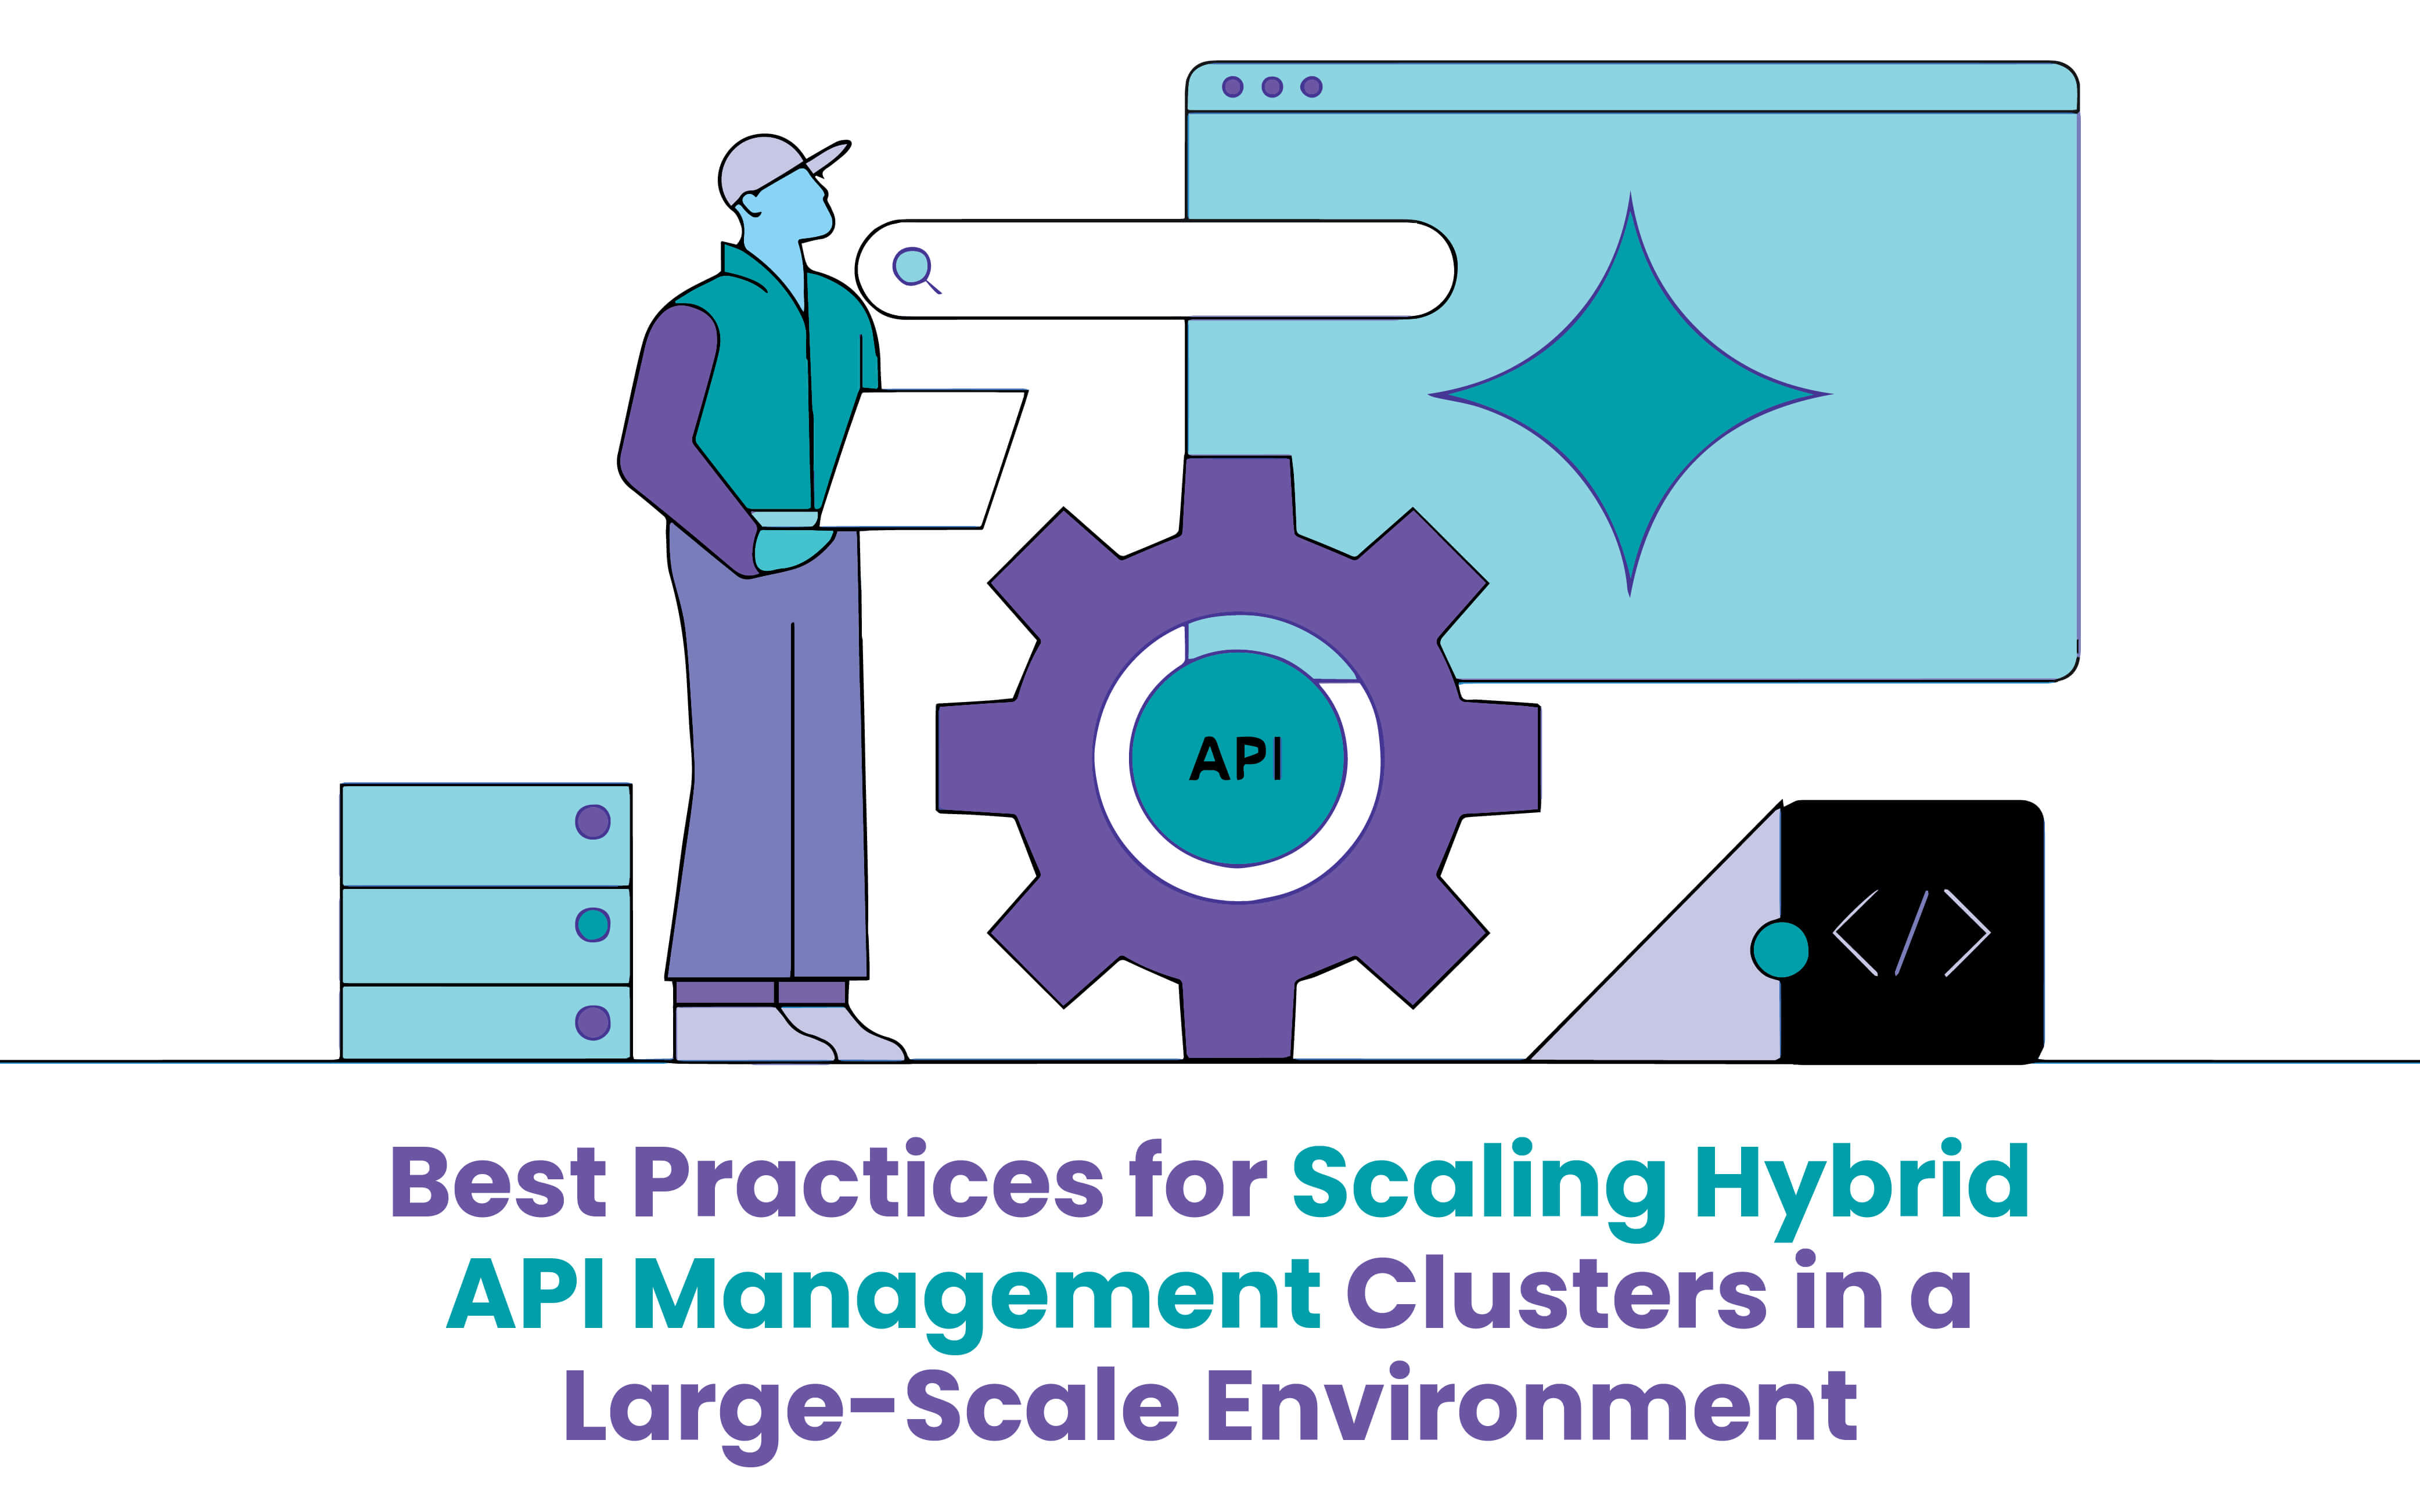 Best Practices for Scaling Hybrid API Management Clusters in a Large-Scale Environment